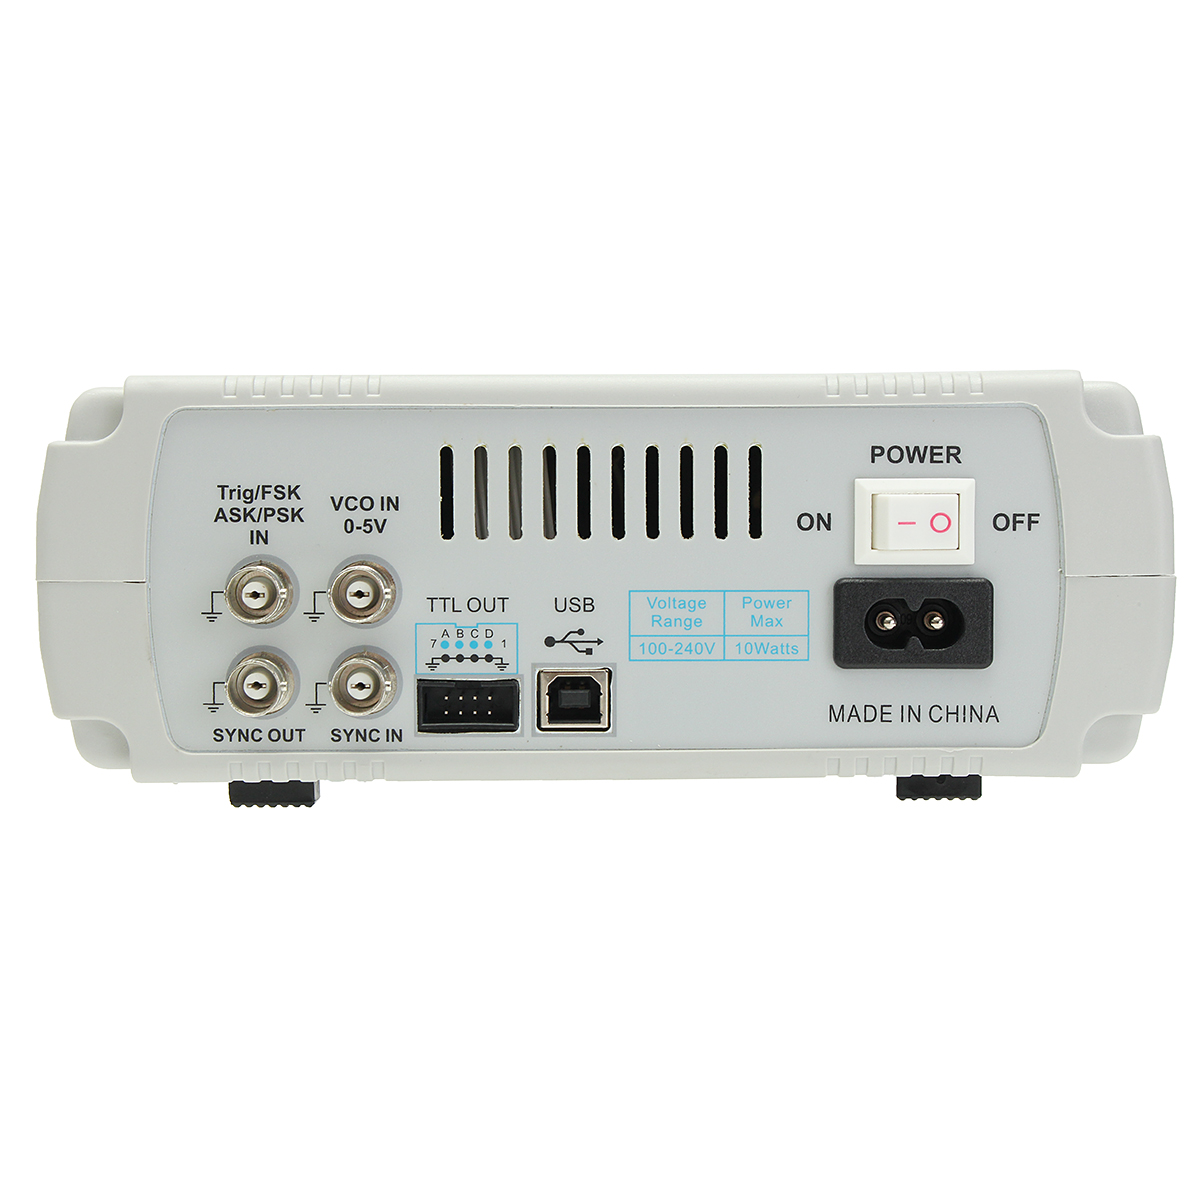 FY6600-Digital-30MHz-60MHz-Dual-Channel-DDS-Function-Arbitrary-Waveform-Signal-Generator-Frequency-M-1957884-7